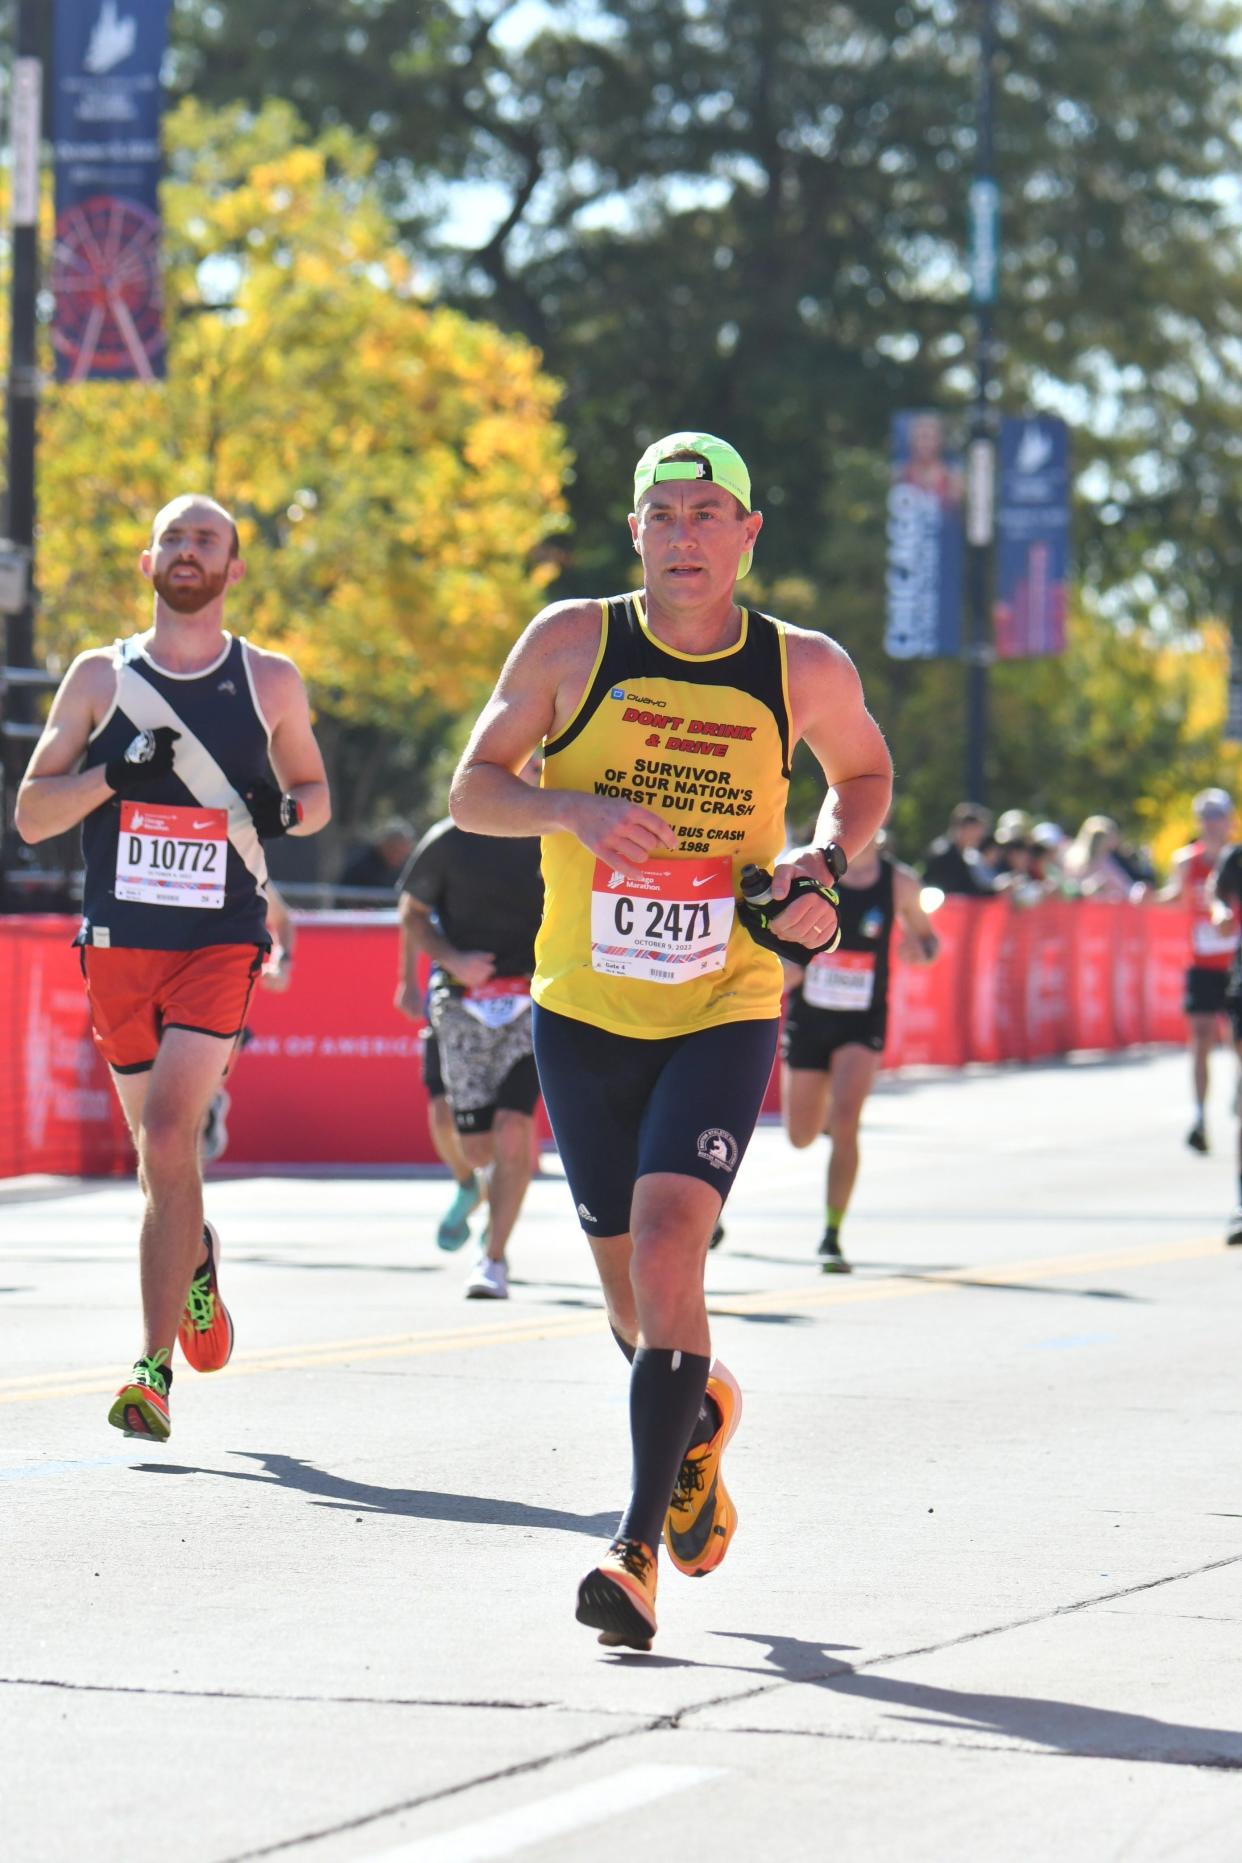 Kentucky native Jason Booher runs the Chicago Marathon in honor of those who lost their lives in the 1988 Carrollton bus crash, the nations deadliest drinking and driving crash.